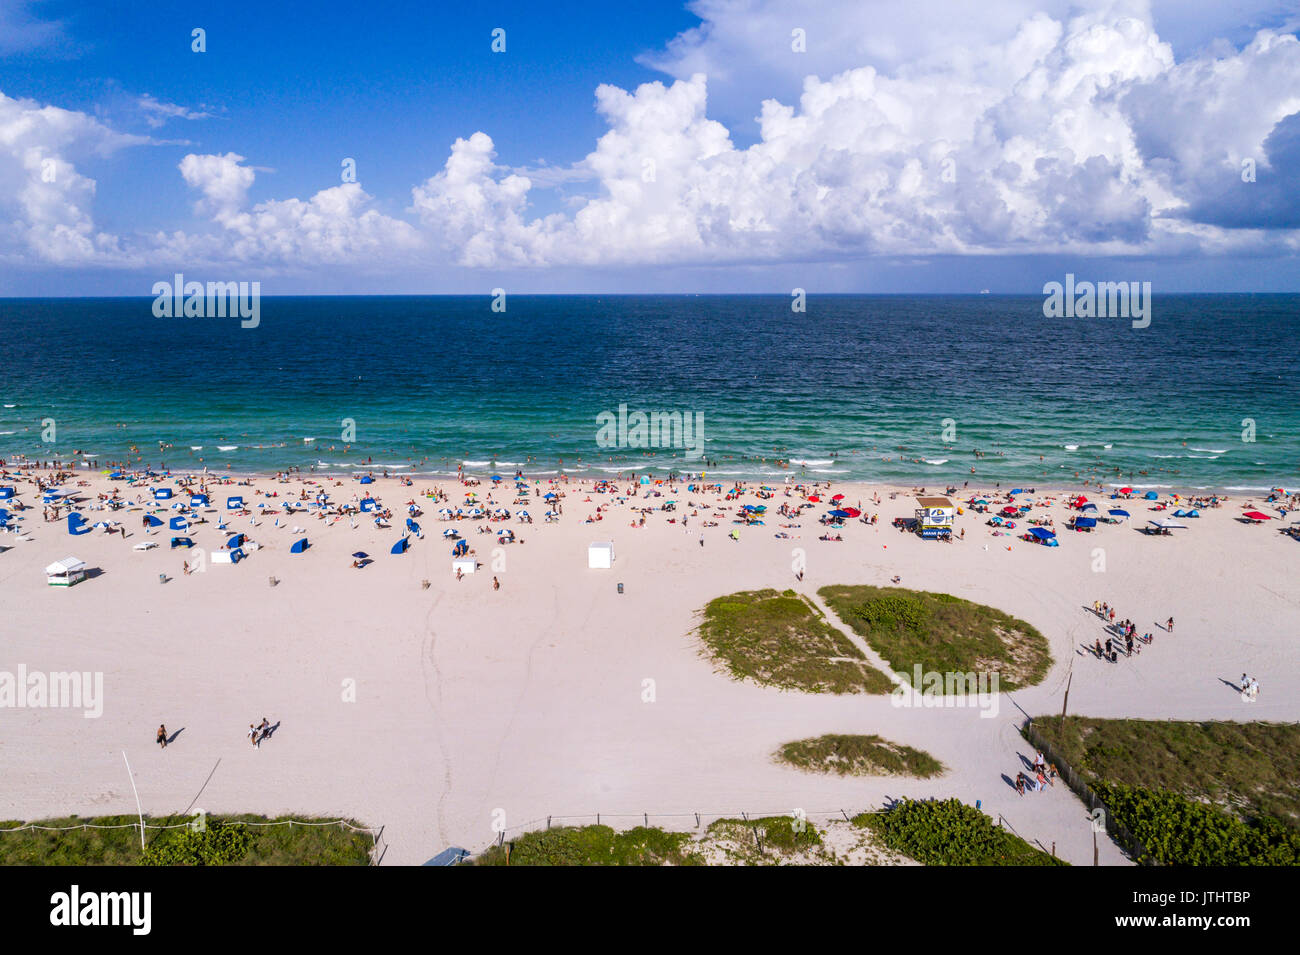 Miami Beach Florida,aerial overhead from above view,above,from above view,Atlantic Ocean,sand,sunbathers,FL17080612d Stock Photo